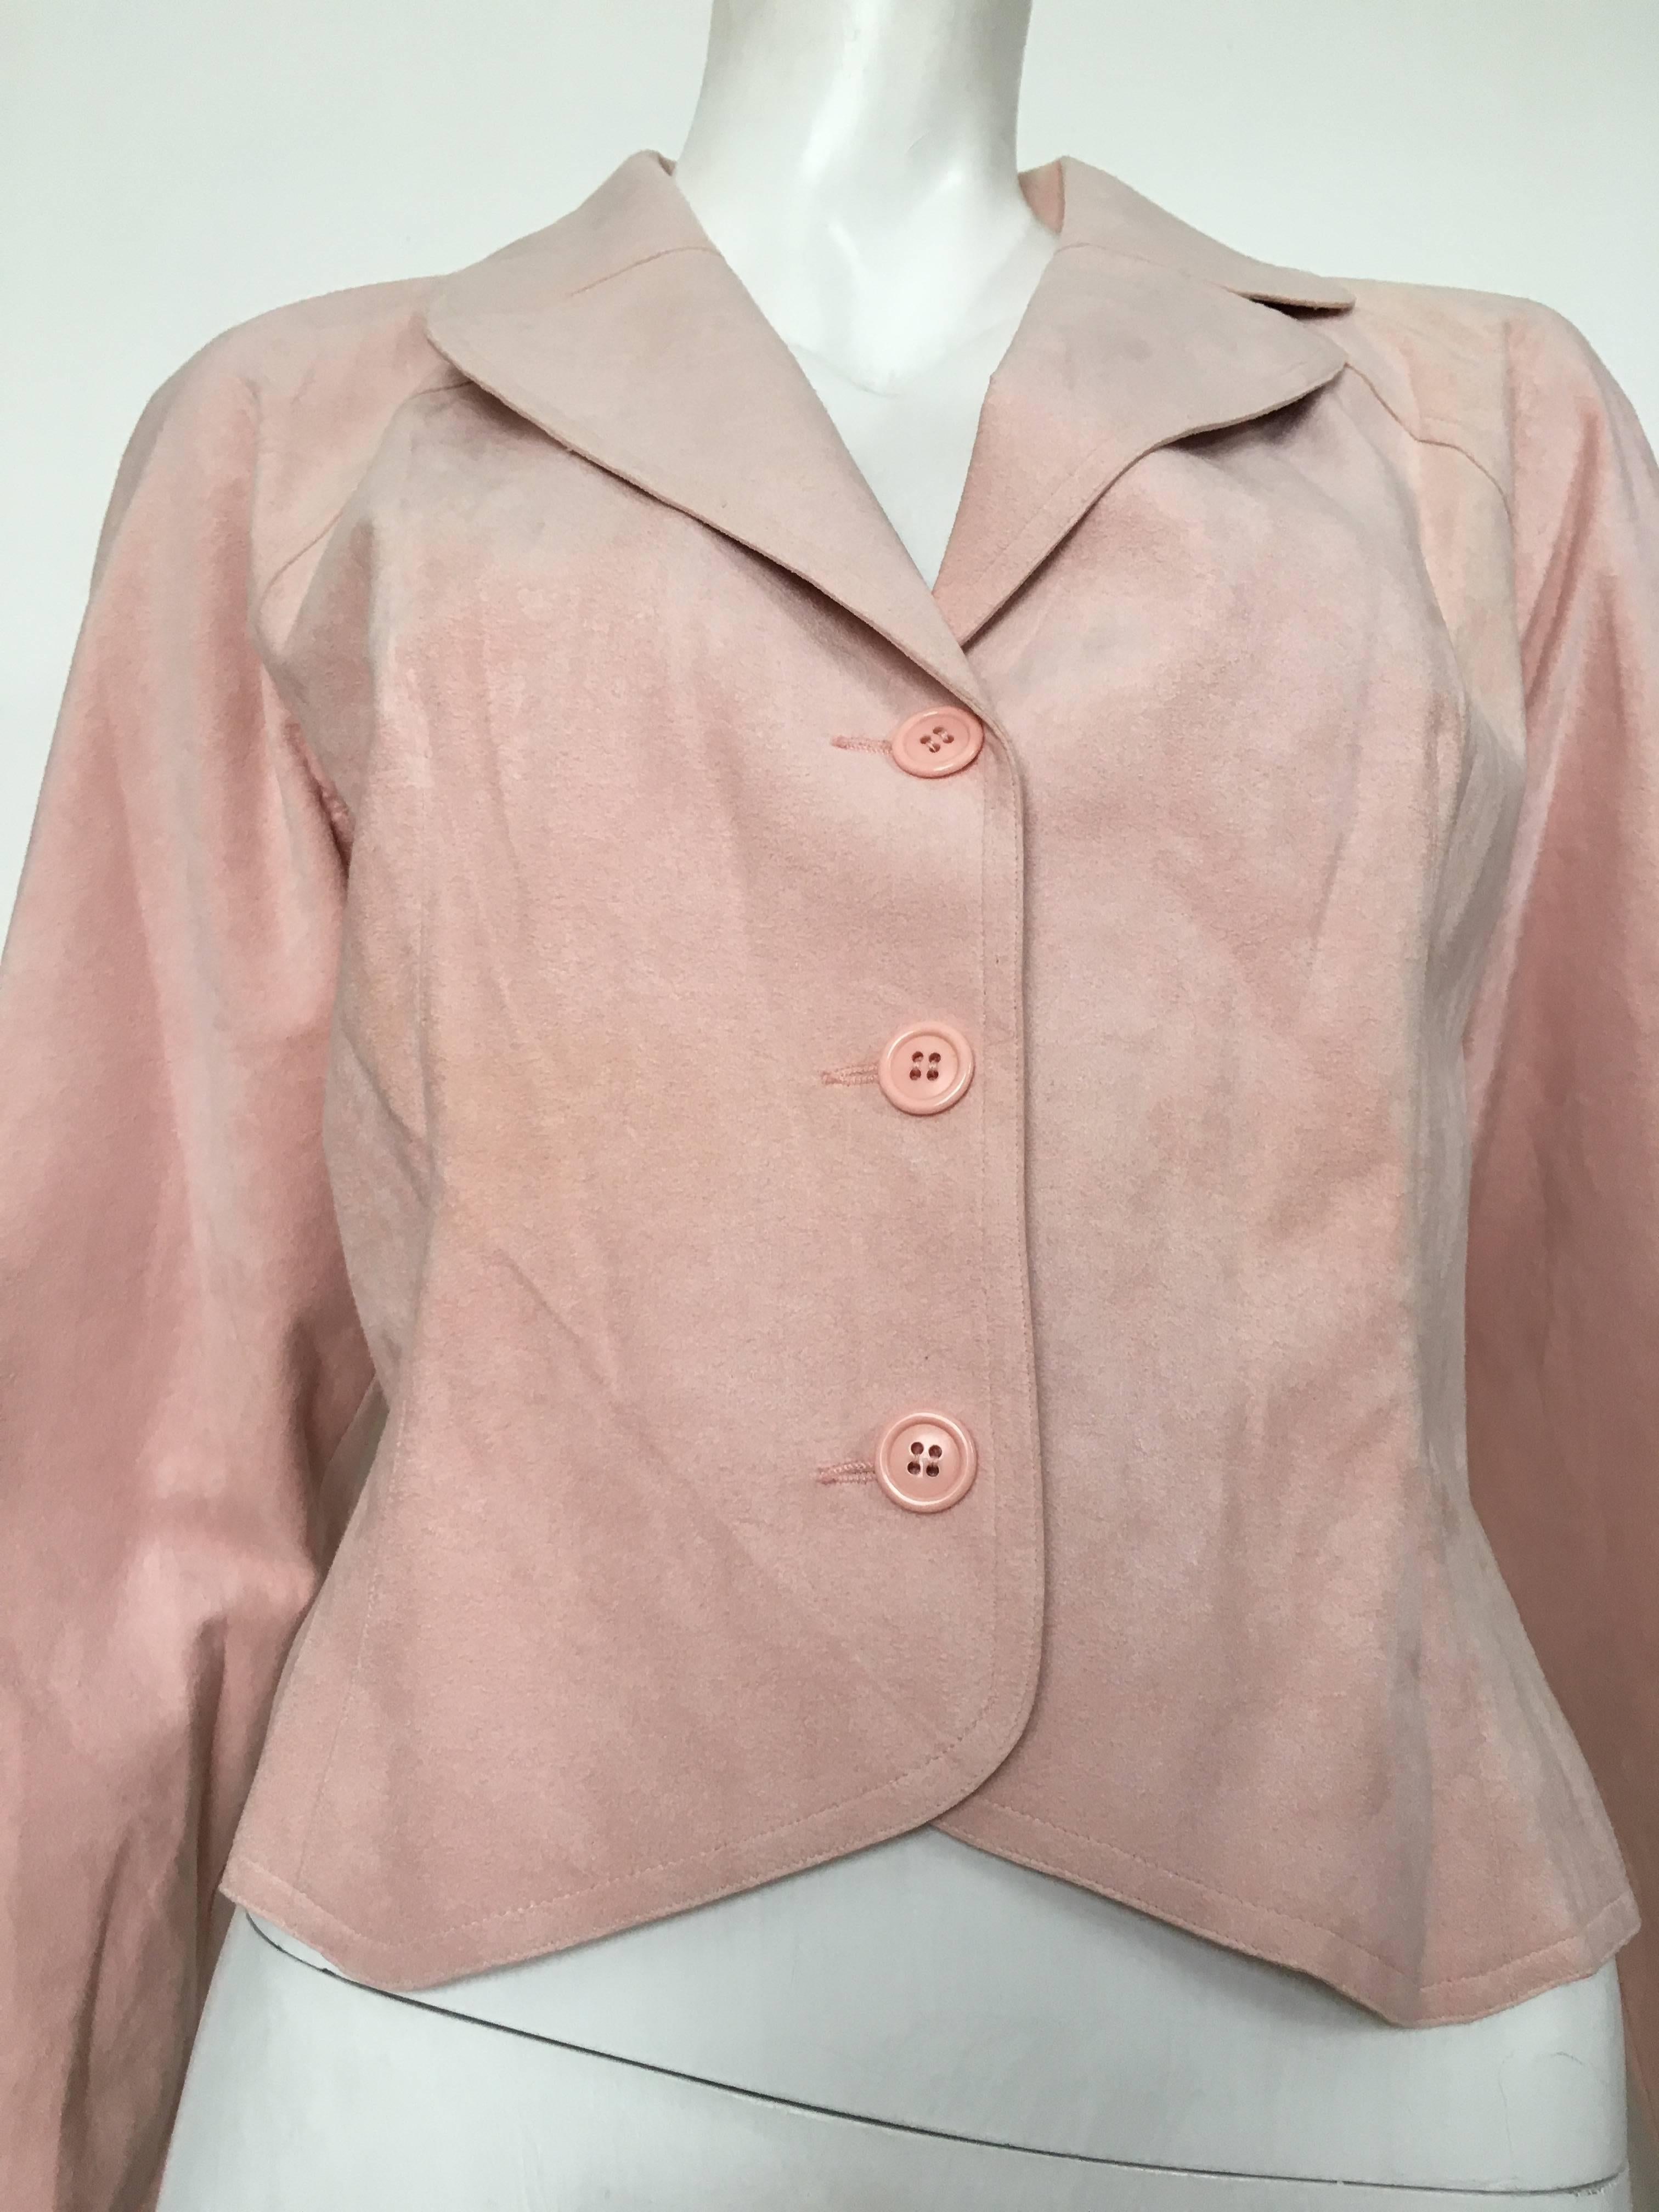 Beige HALSTON 1970s Pink Ultra Suede Cropped Jacket Size 14. Never Worn. For Sale